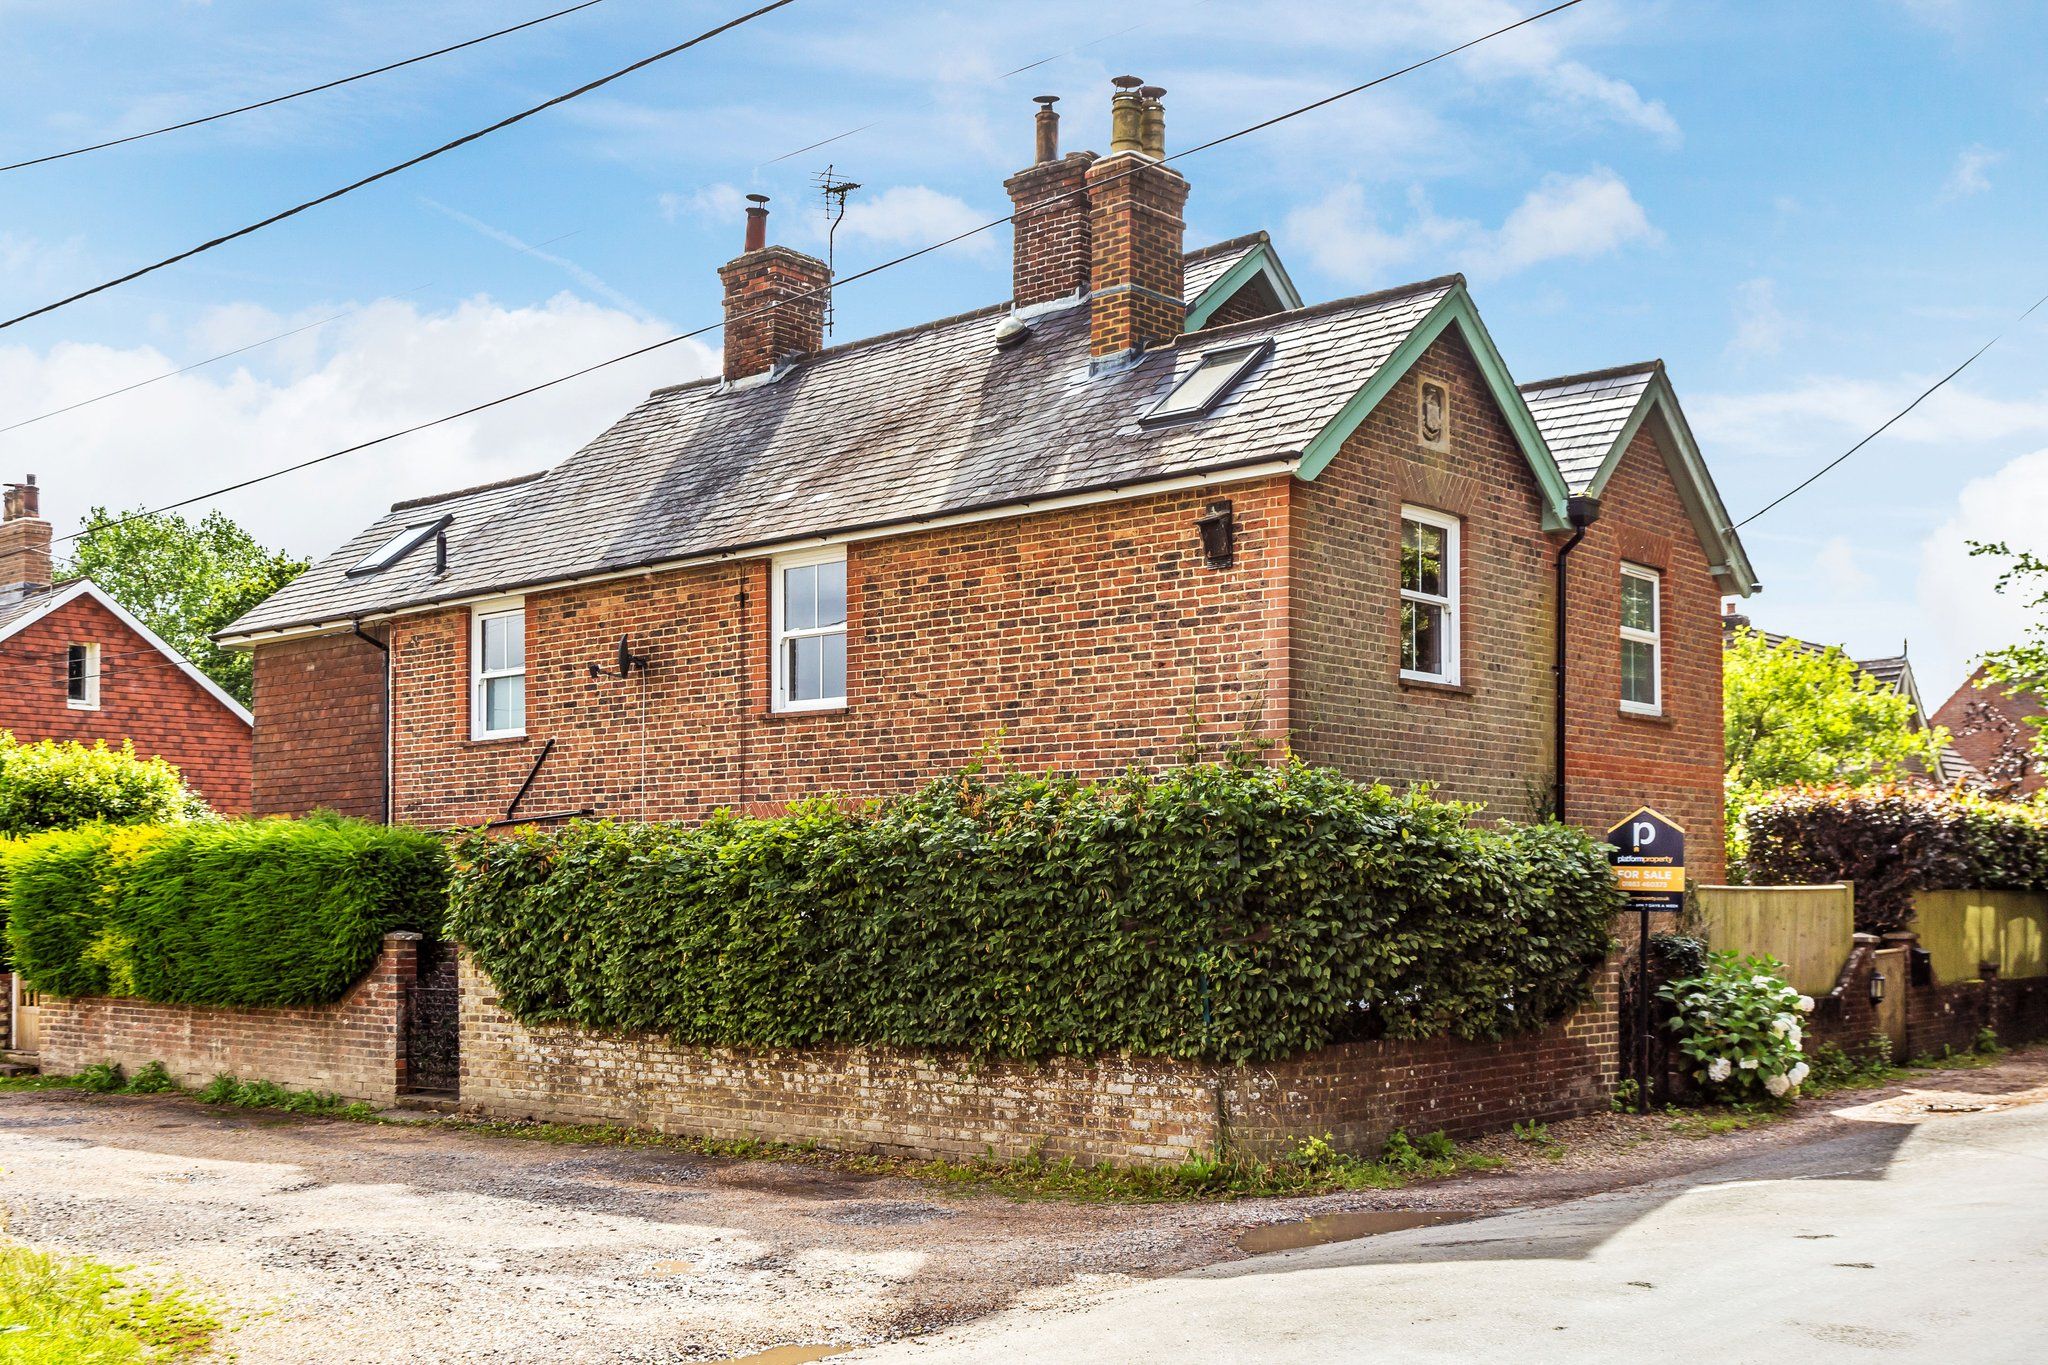 Palehouse Common, Framfield, Uckfield, East Sussex, TN22 5QY